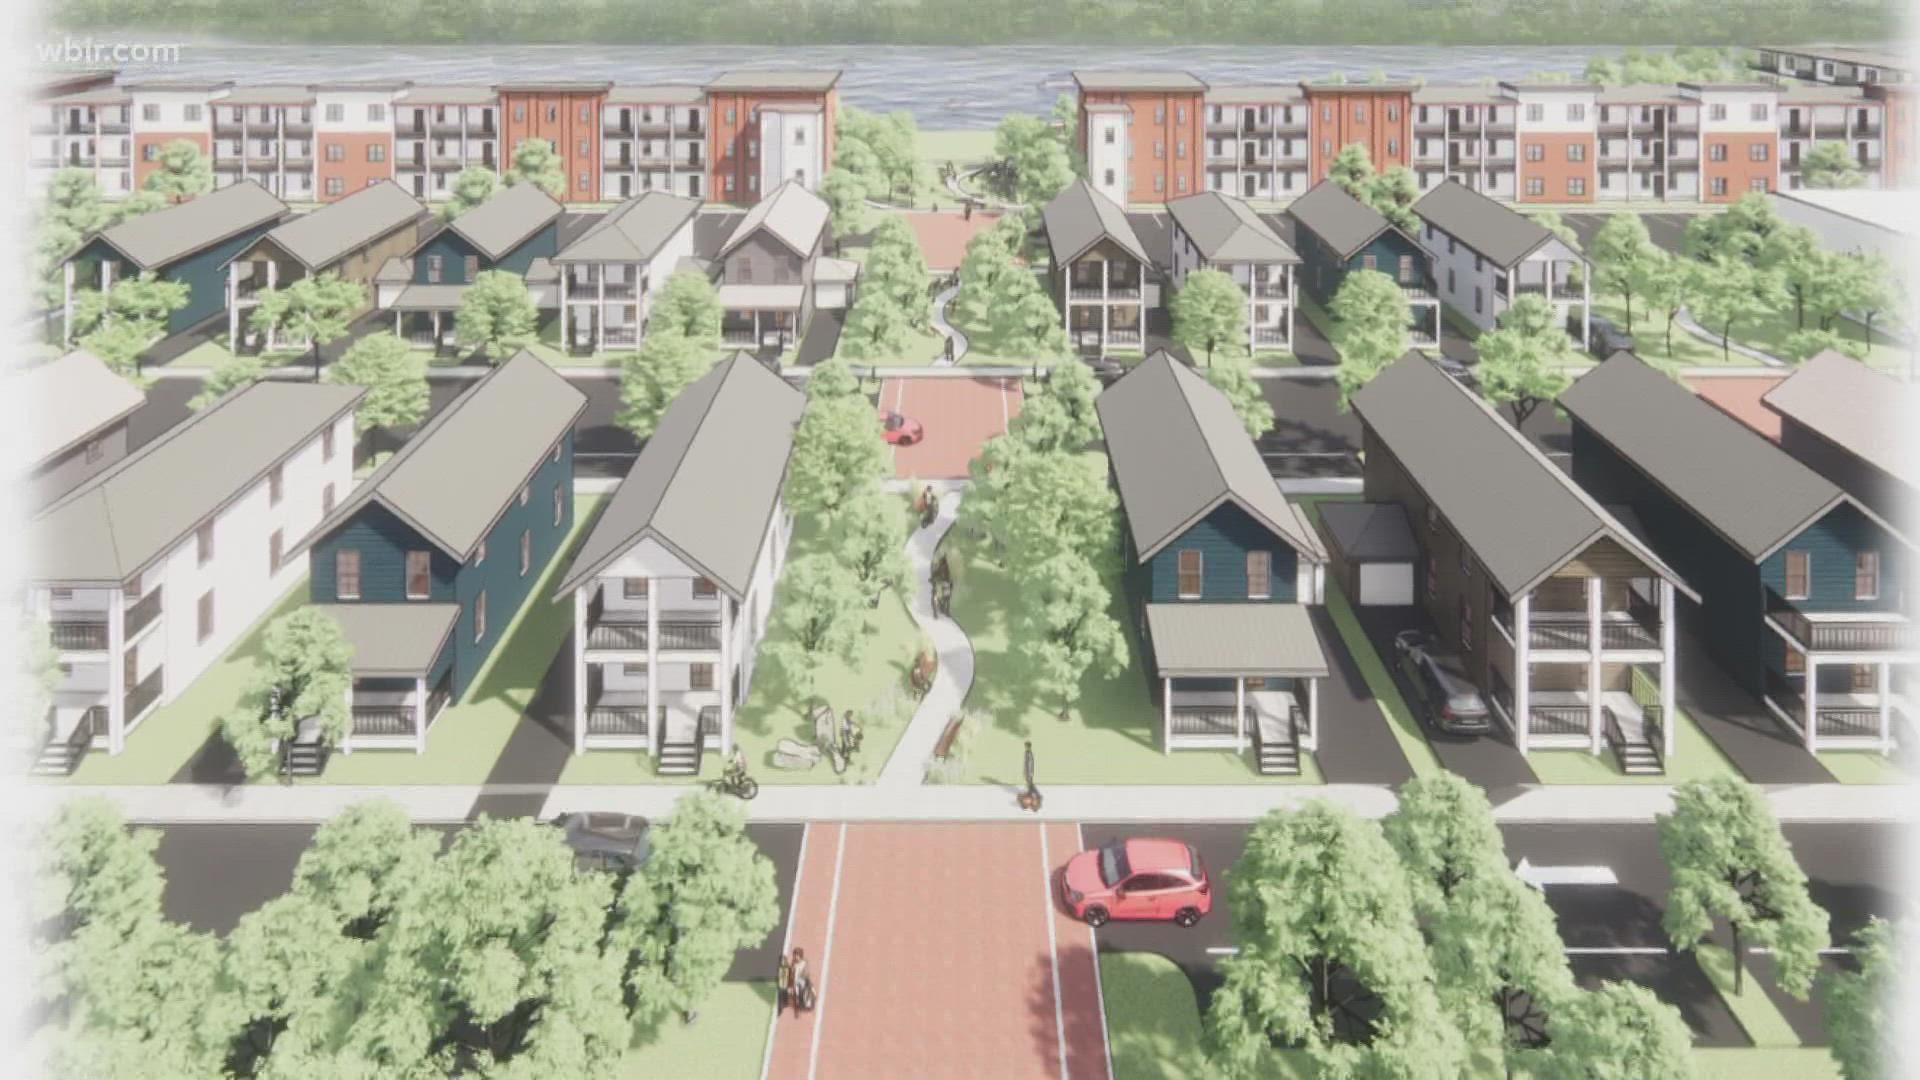 A developer plans to build an apartment complex and rental neighborhood with pocket parks and riverfront walking trails.